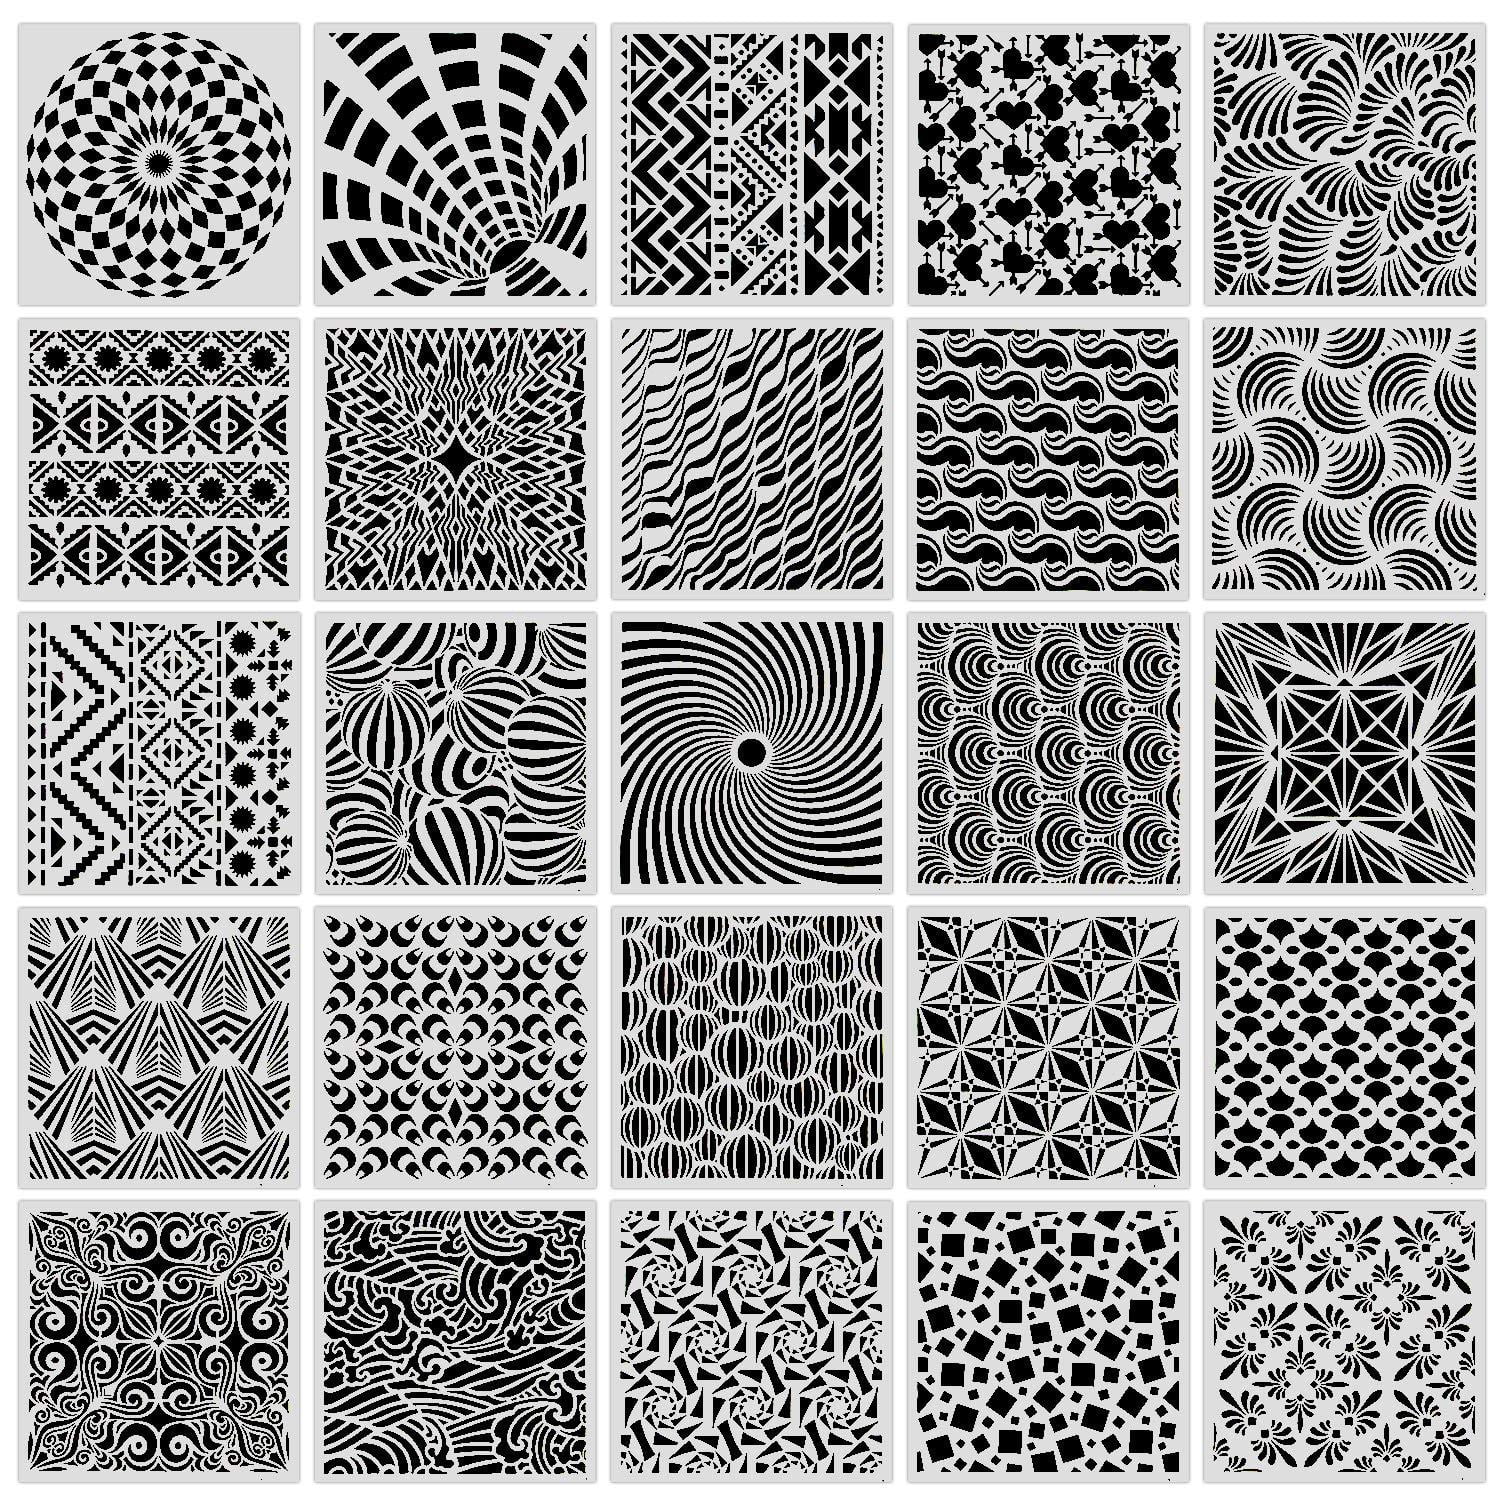 Purartly 30-Pack Geometric Stencils 6 x 6 Inch Painting Templates